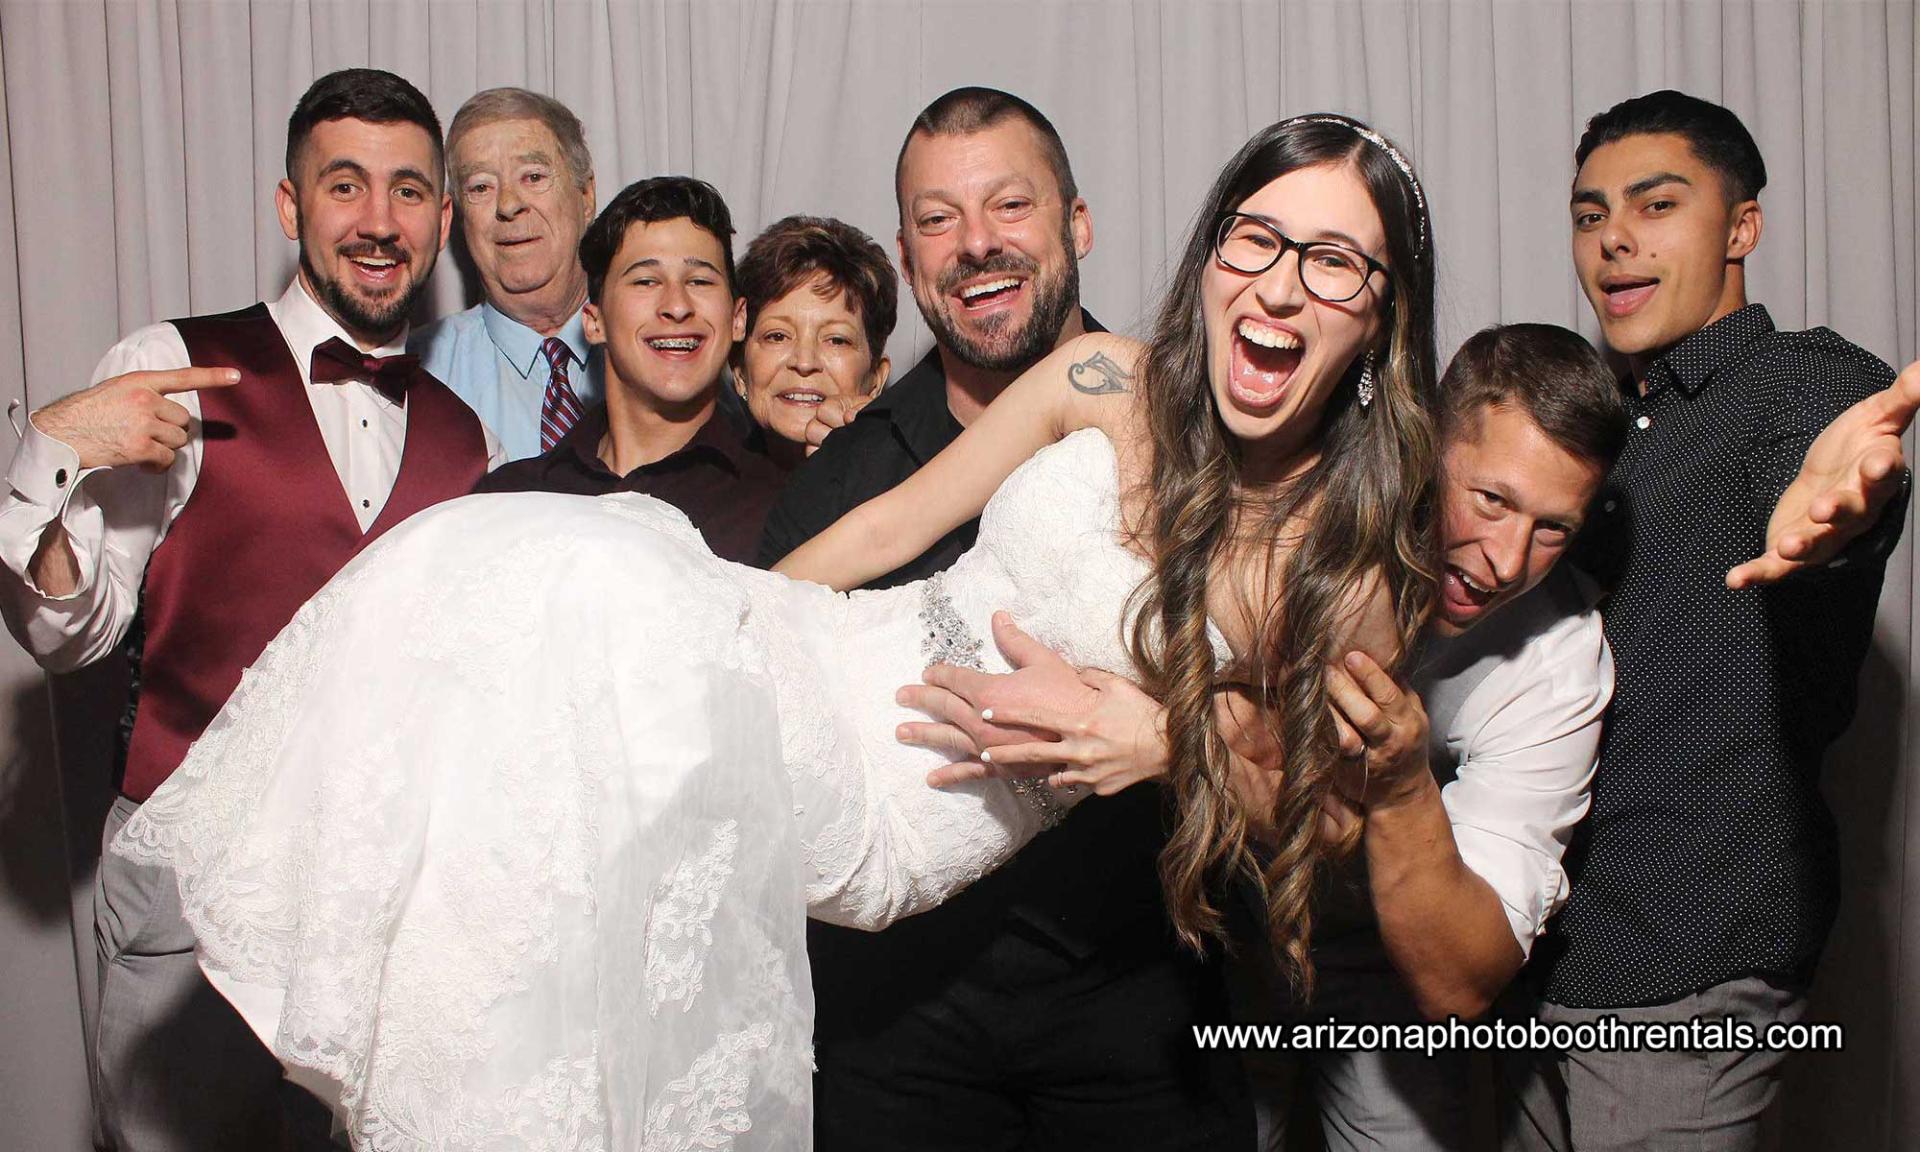 Affordable Photo Booth Rentals | Unlimited Photo Sessions